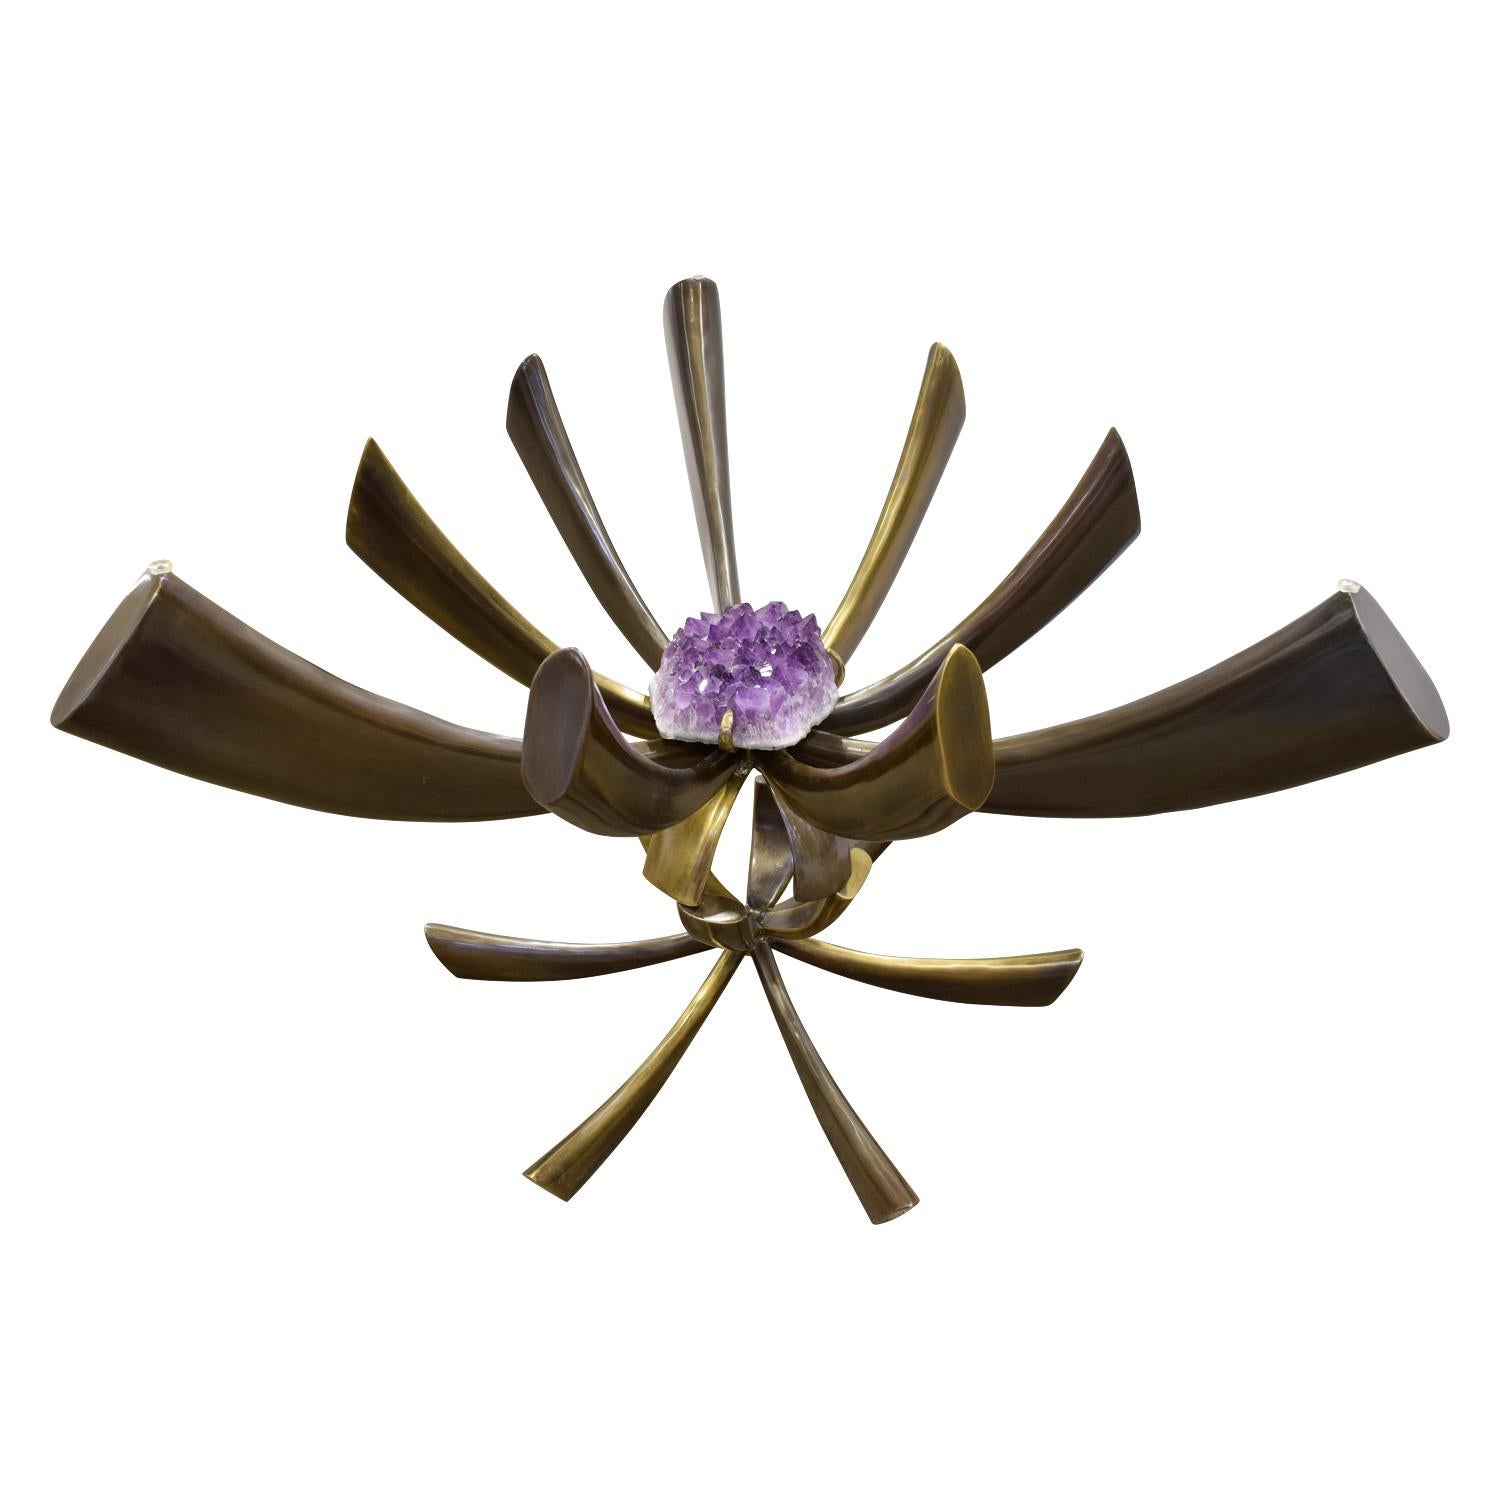 Mid-Century Modern Jacques Duval-Brasseur Rare Table in Bronze with Mounted Amethyst 1970s 'Signed'